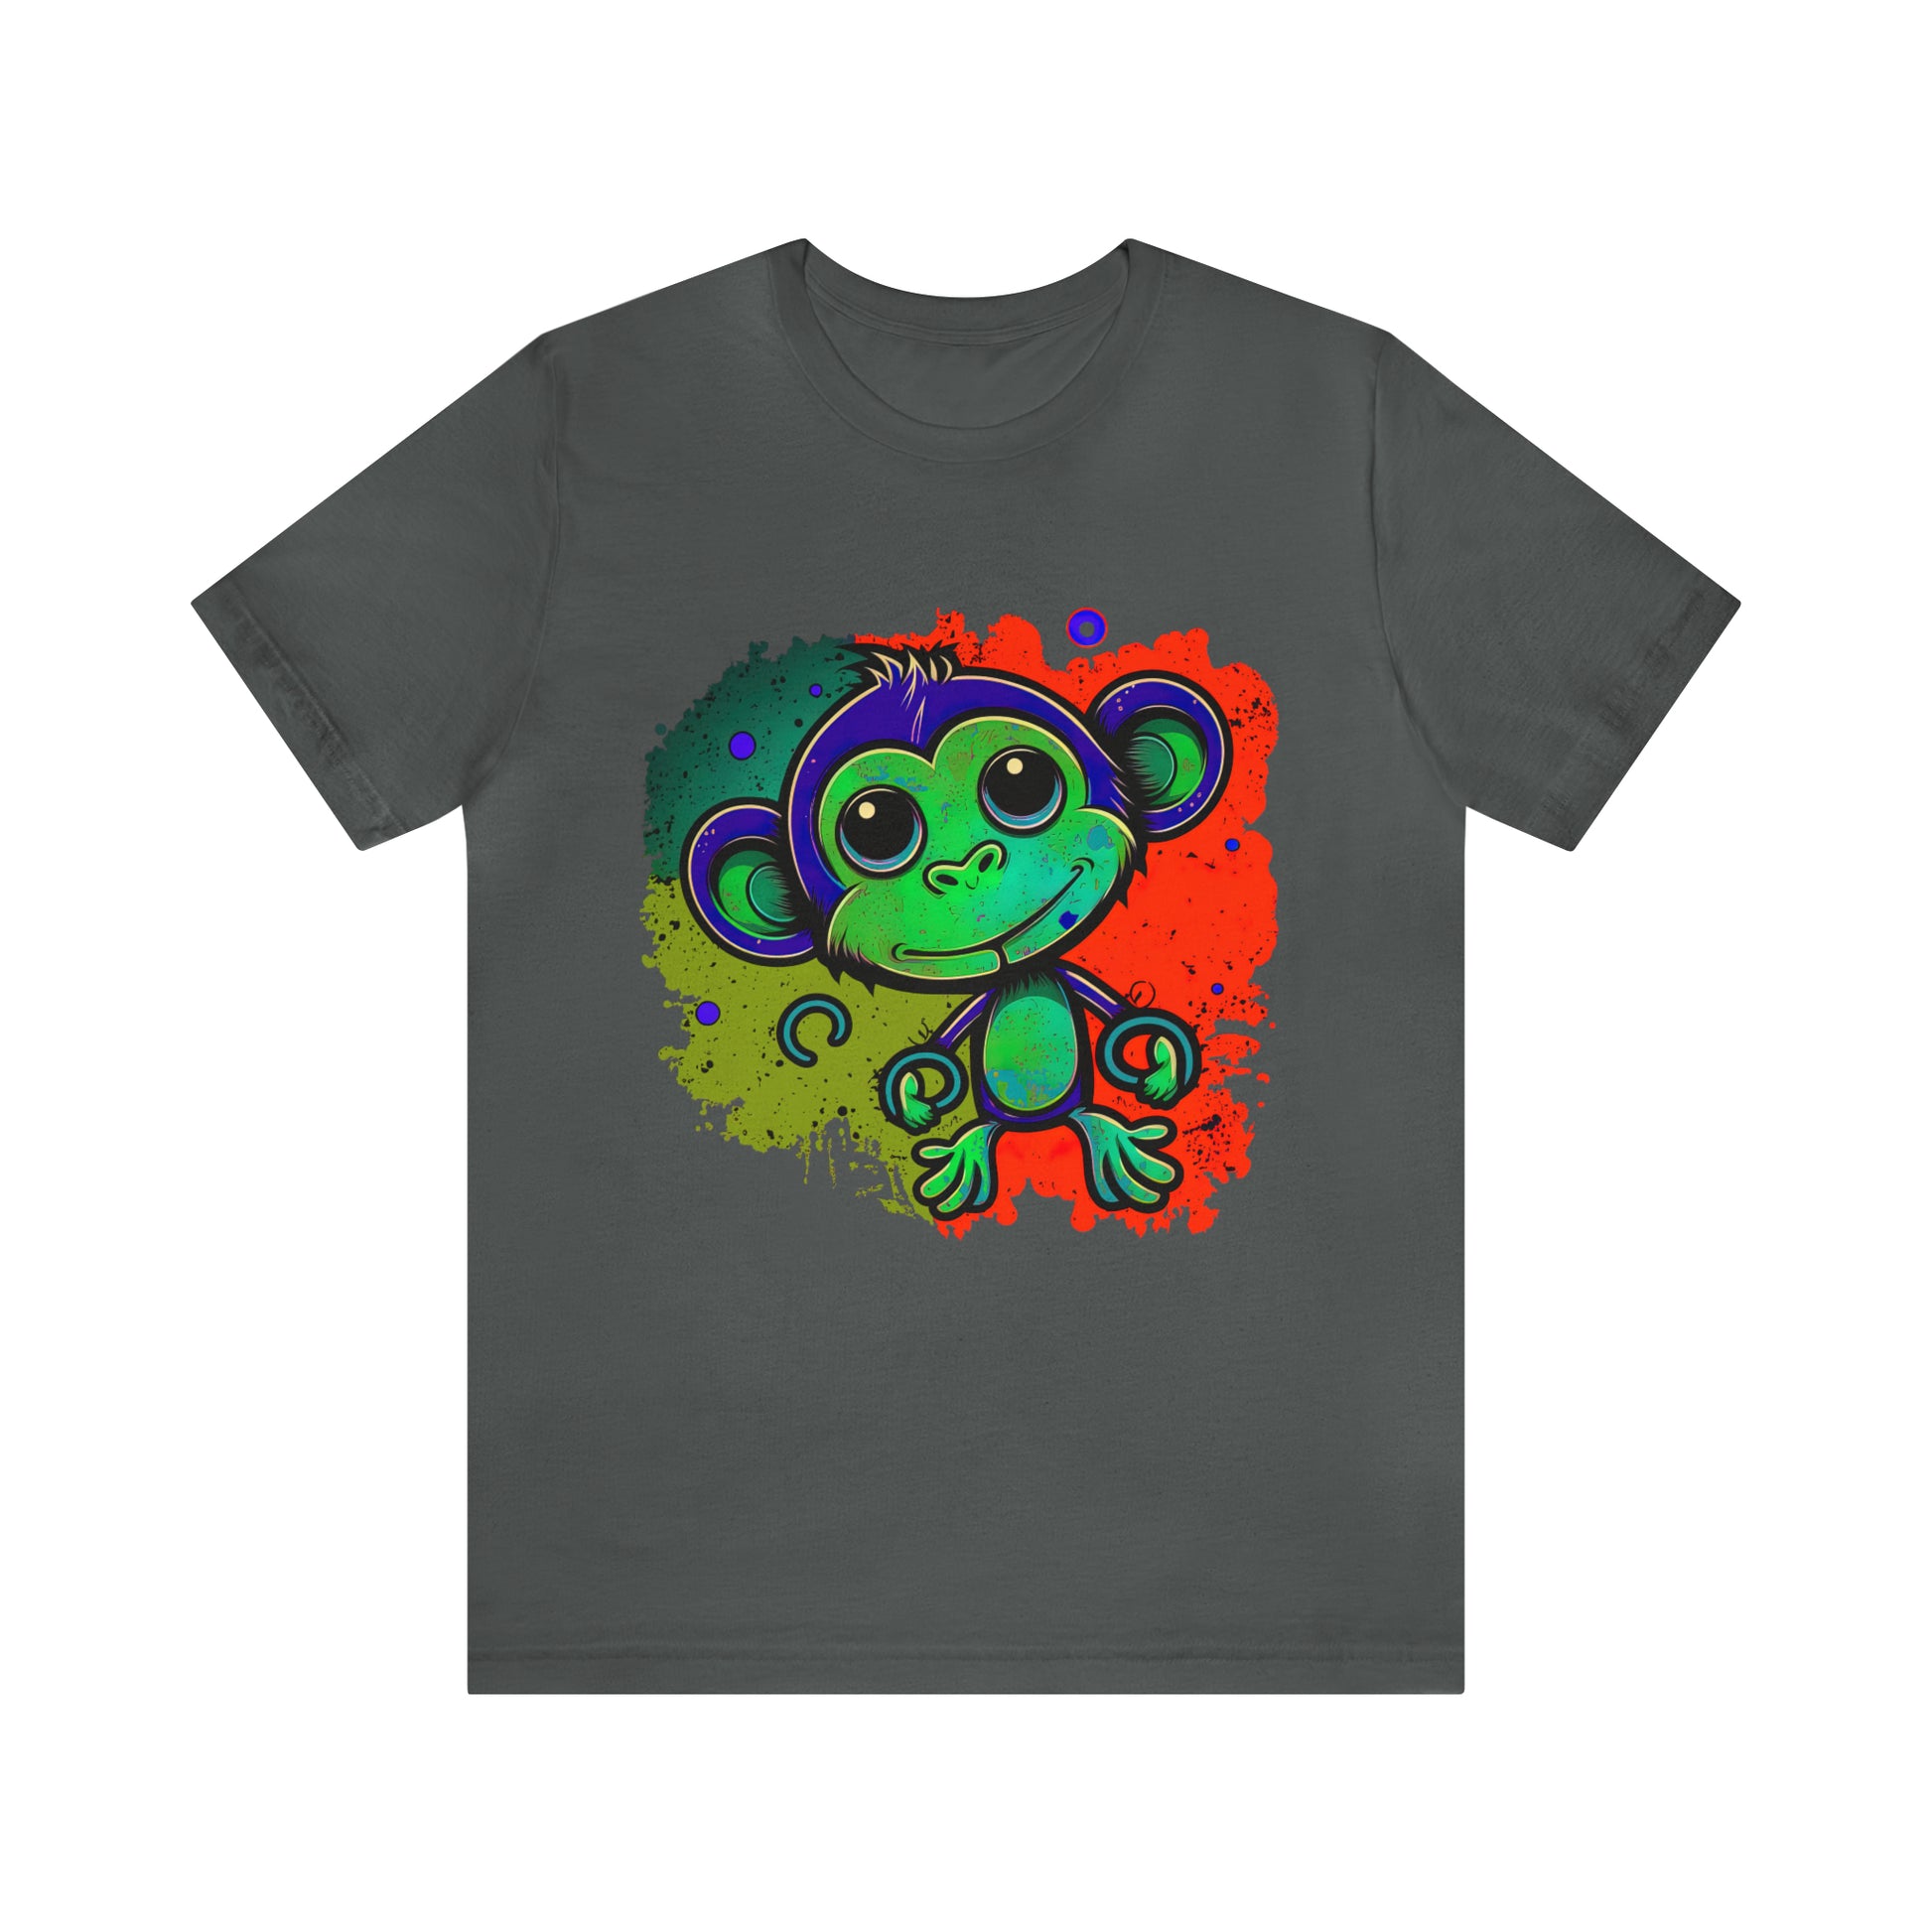 psychedelicBRANDz's Vibrant Forest Frolic featuring a monkey in a psychedelic design on an asphalt shirt